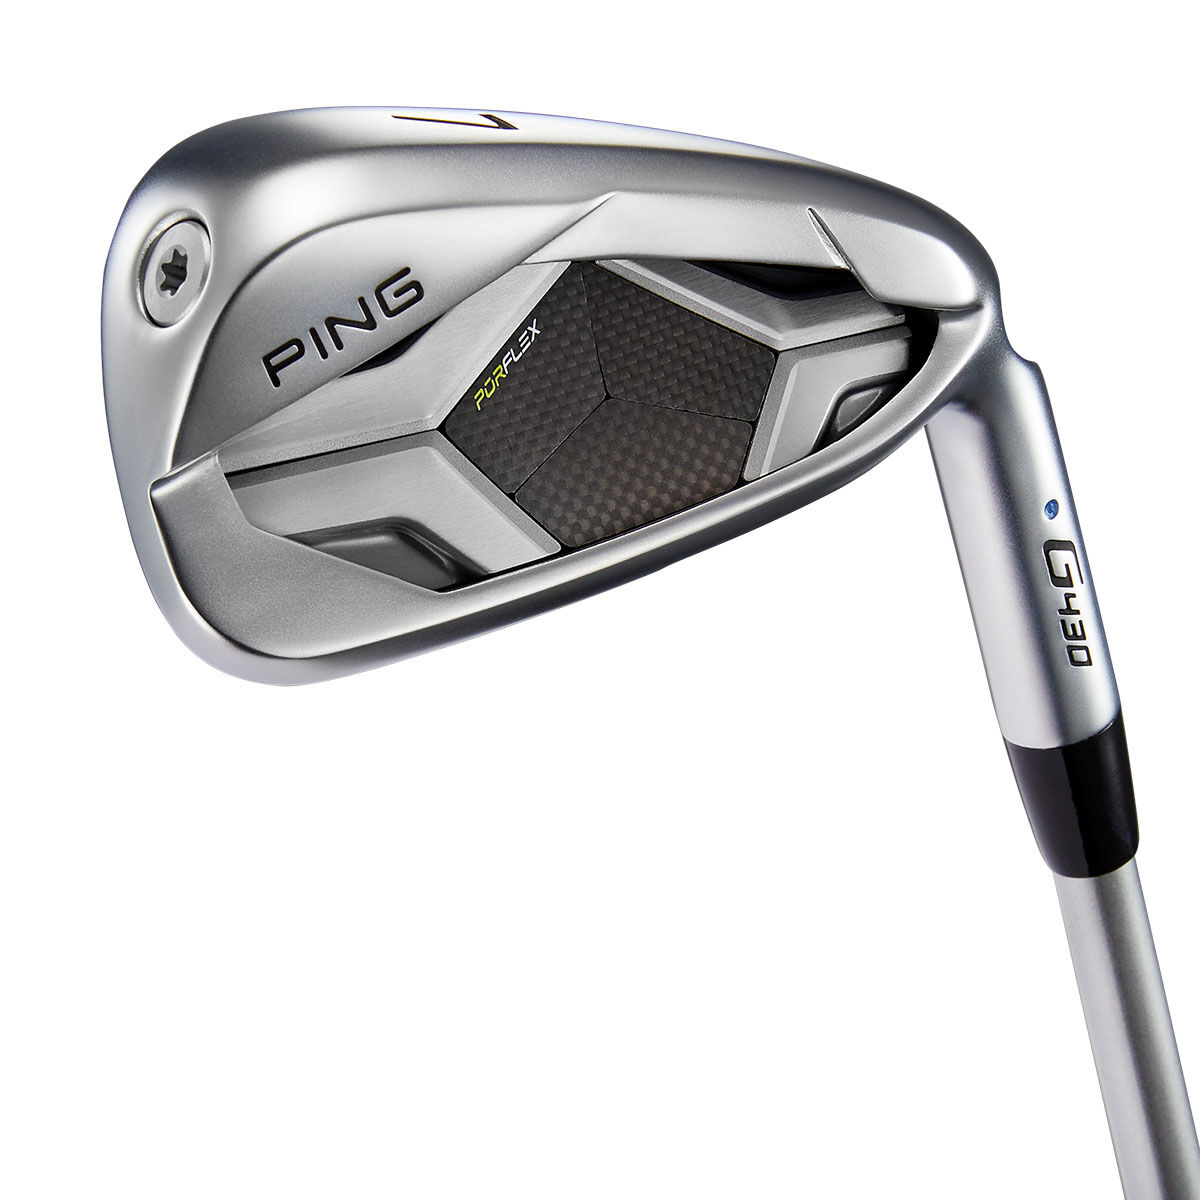 Ping Grey and Black G430 HL Graphite Golf Irons | American Golf, One Size